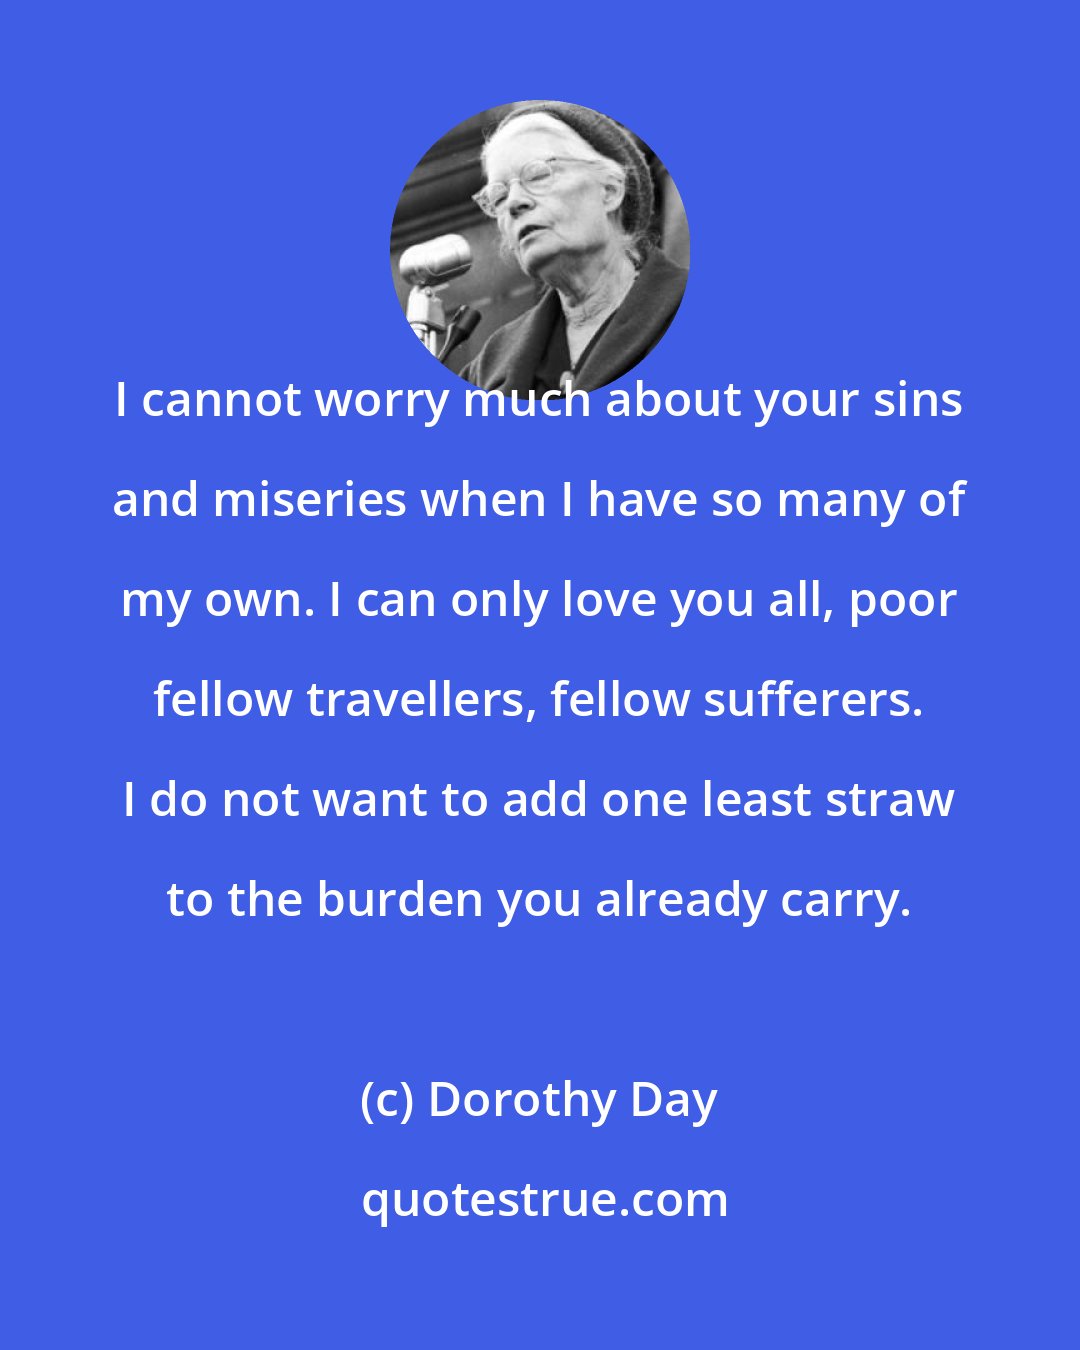 Dorothy Day: I cannot worry much about your sins and miseries when I have so many of my own. I can only love you all, poor fellow travellers, fellow sufferers. I do not want to add one least straw to the burden you already carry.